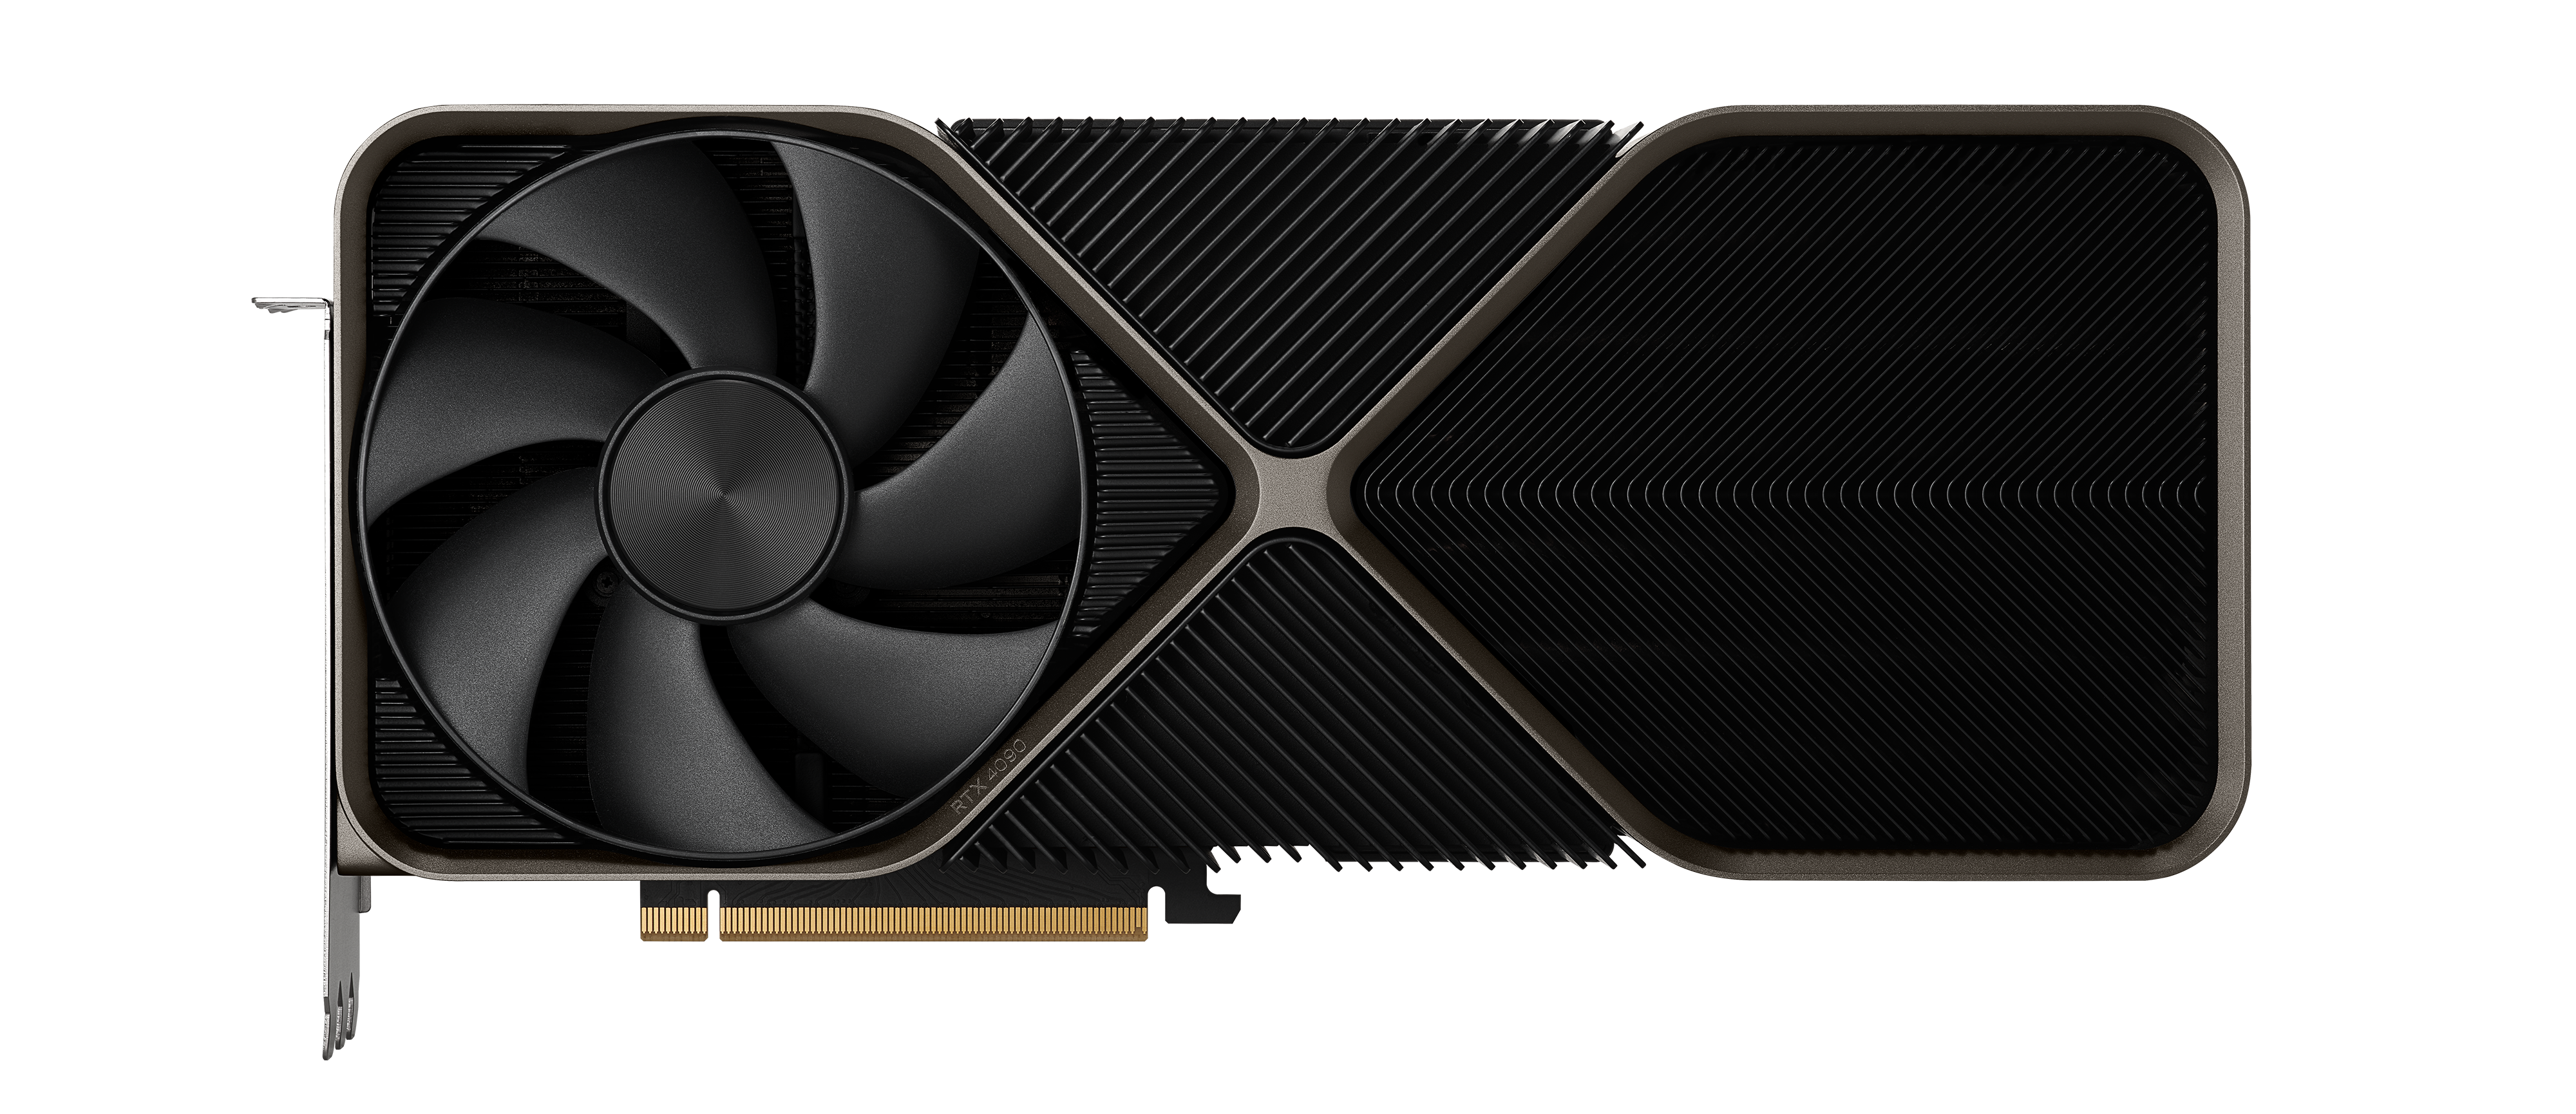 ASUS Teases ROG STRIX RTX 4090 and RTX 4080 White Edition Graphics Cards